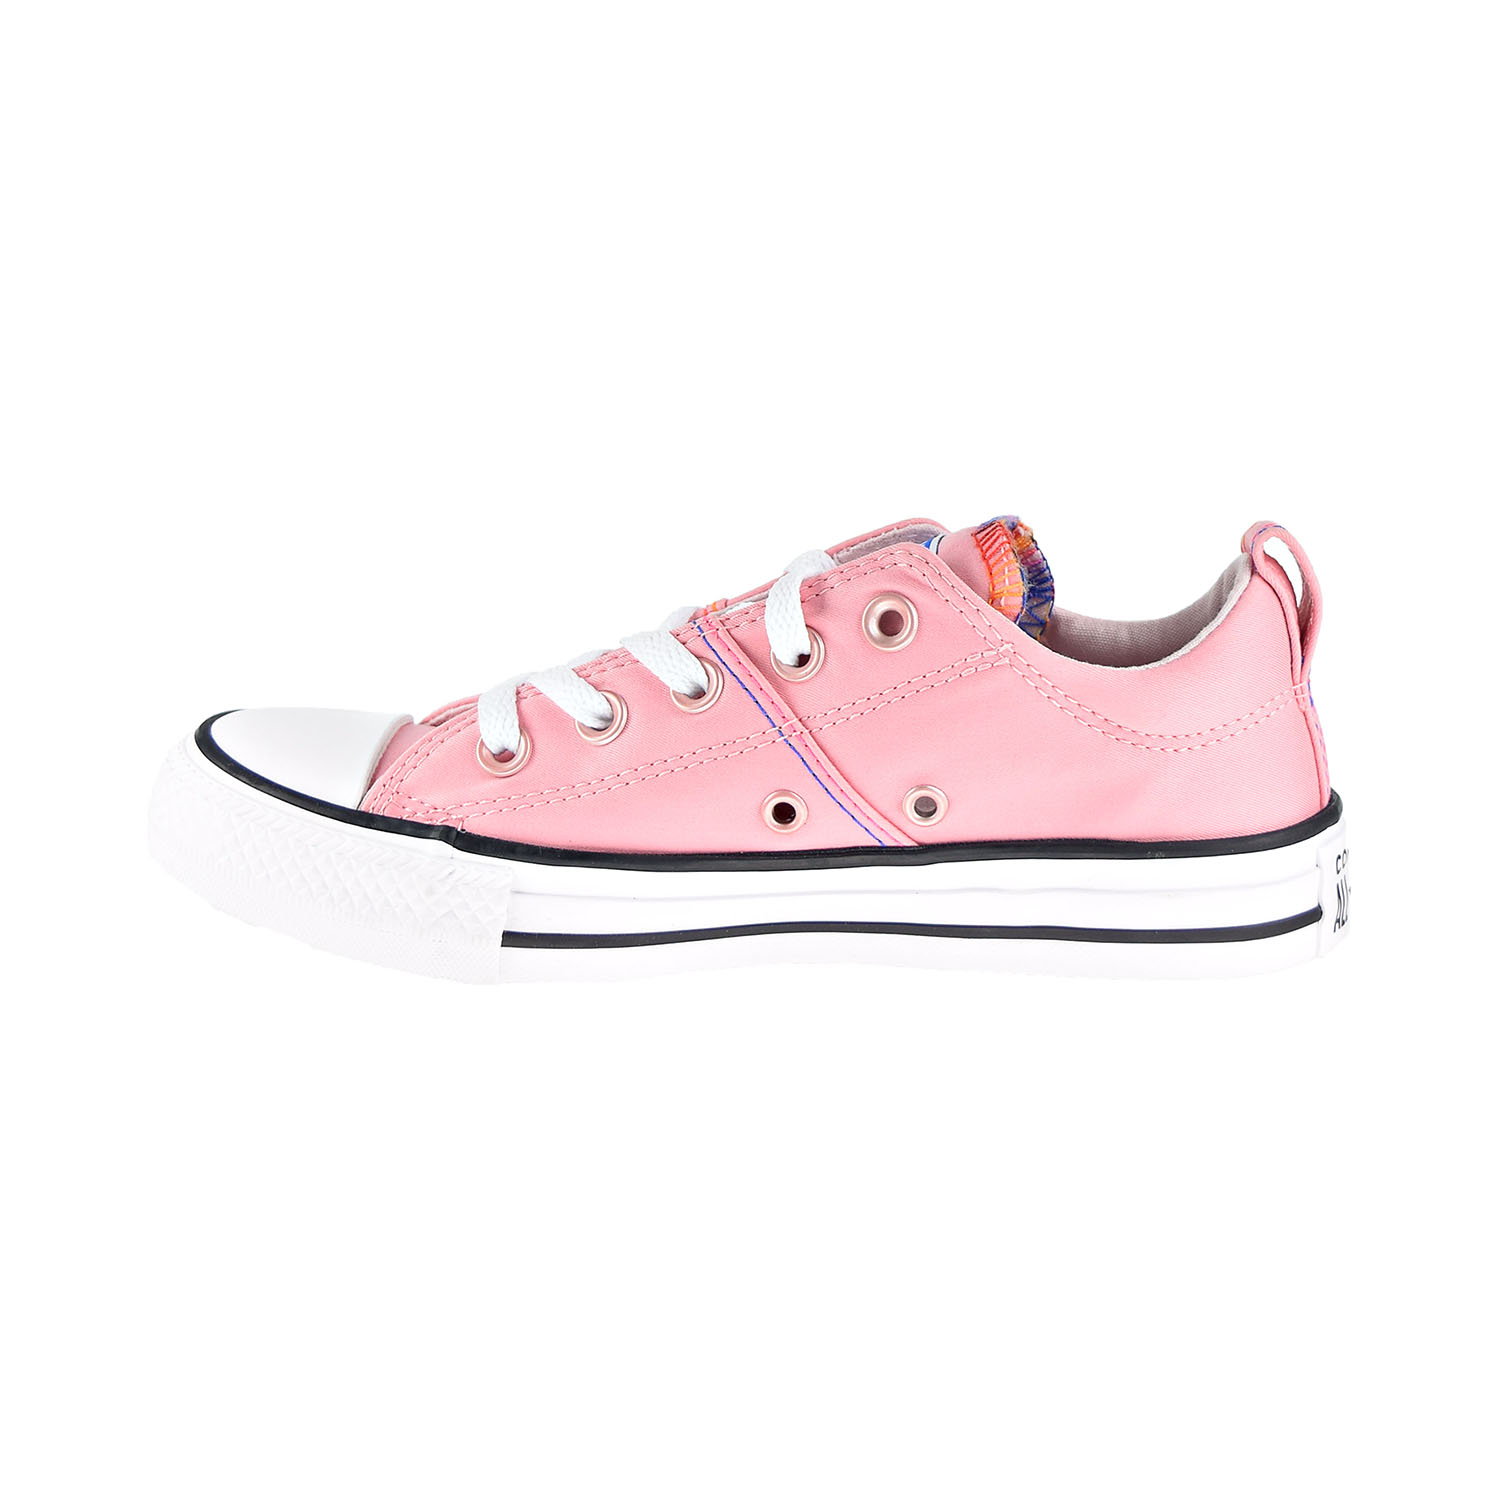 Converse Chuck Taylor All Star Madison Ox Women's Shoes Coastal Pink ...